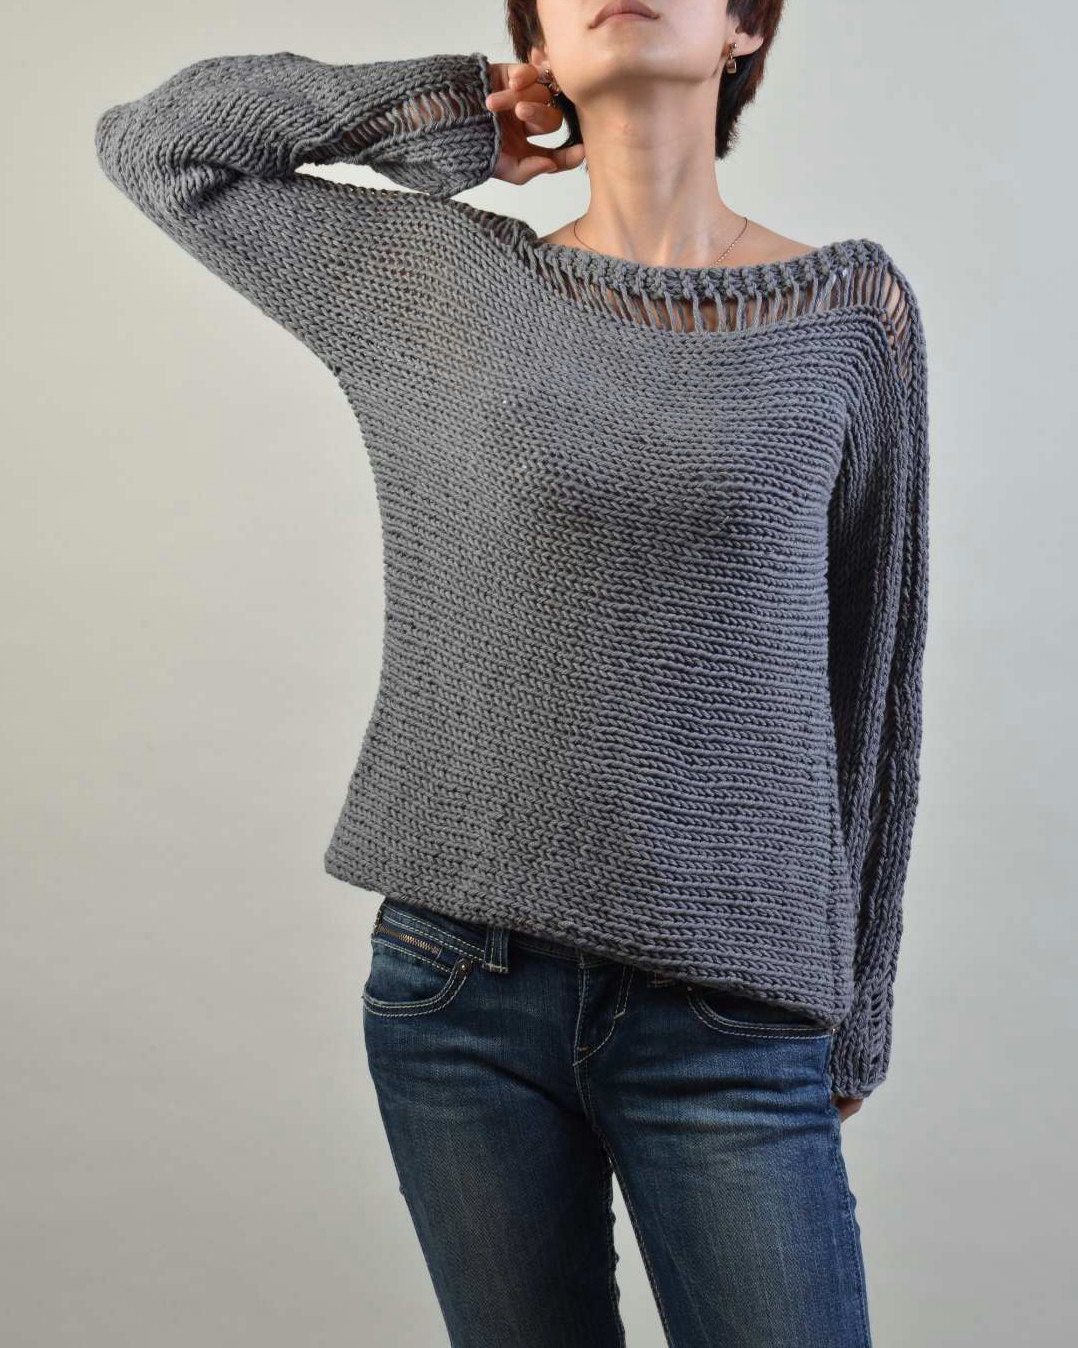 Hand Knit Woman Sweater Eco Cotton Charcoal Sweater Dark Grey - Etsy